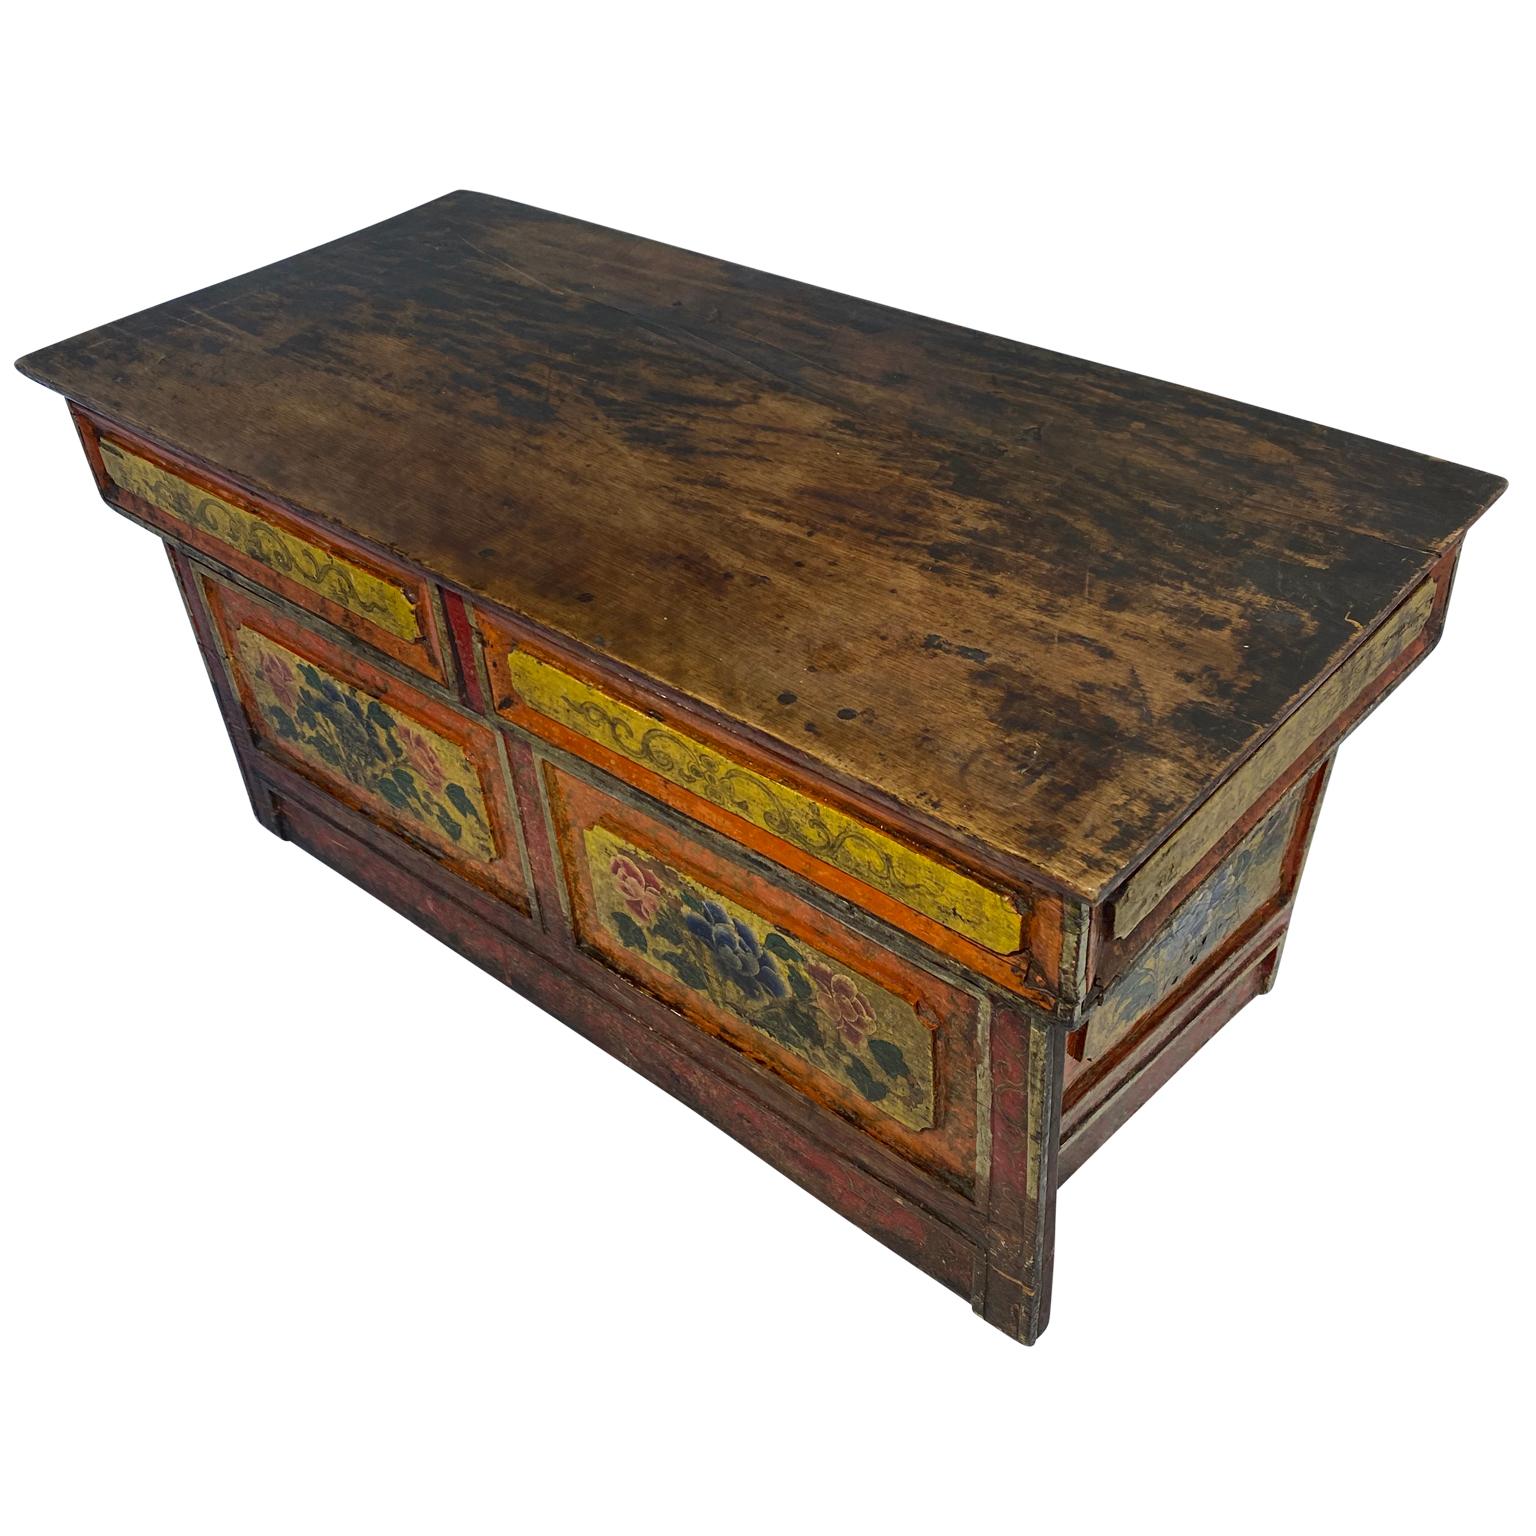 Southeast Asian Small Asian Red And Yellow Painted Folk Art Desk-Top Writing Desk